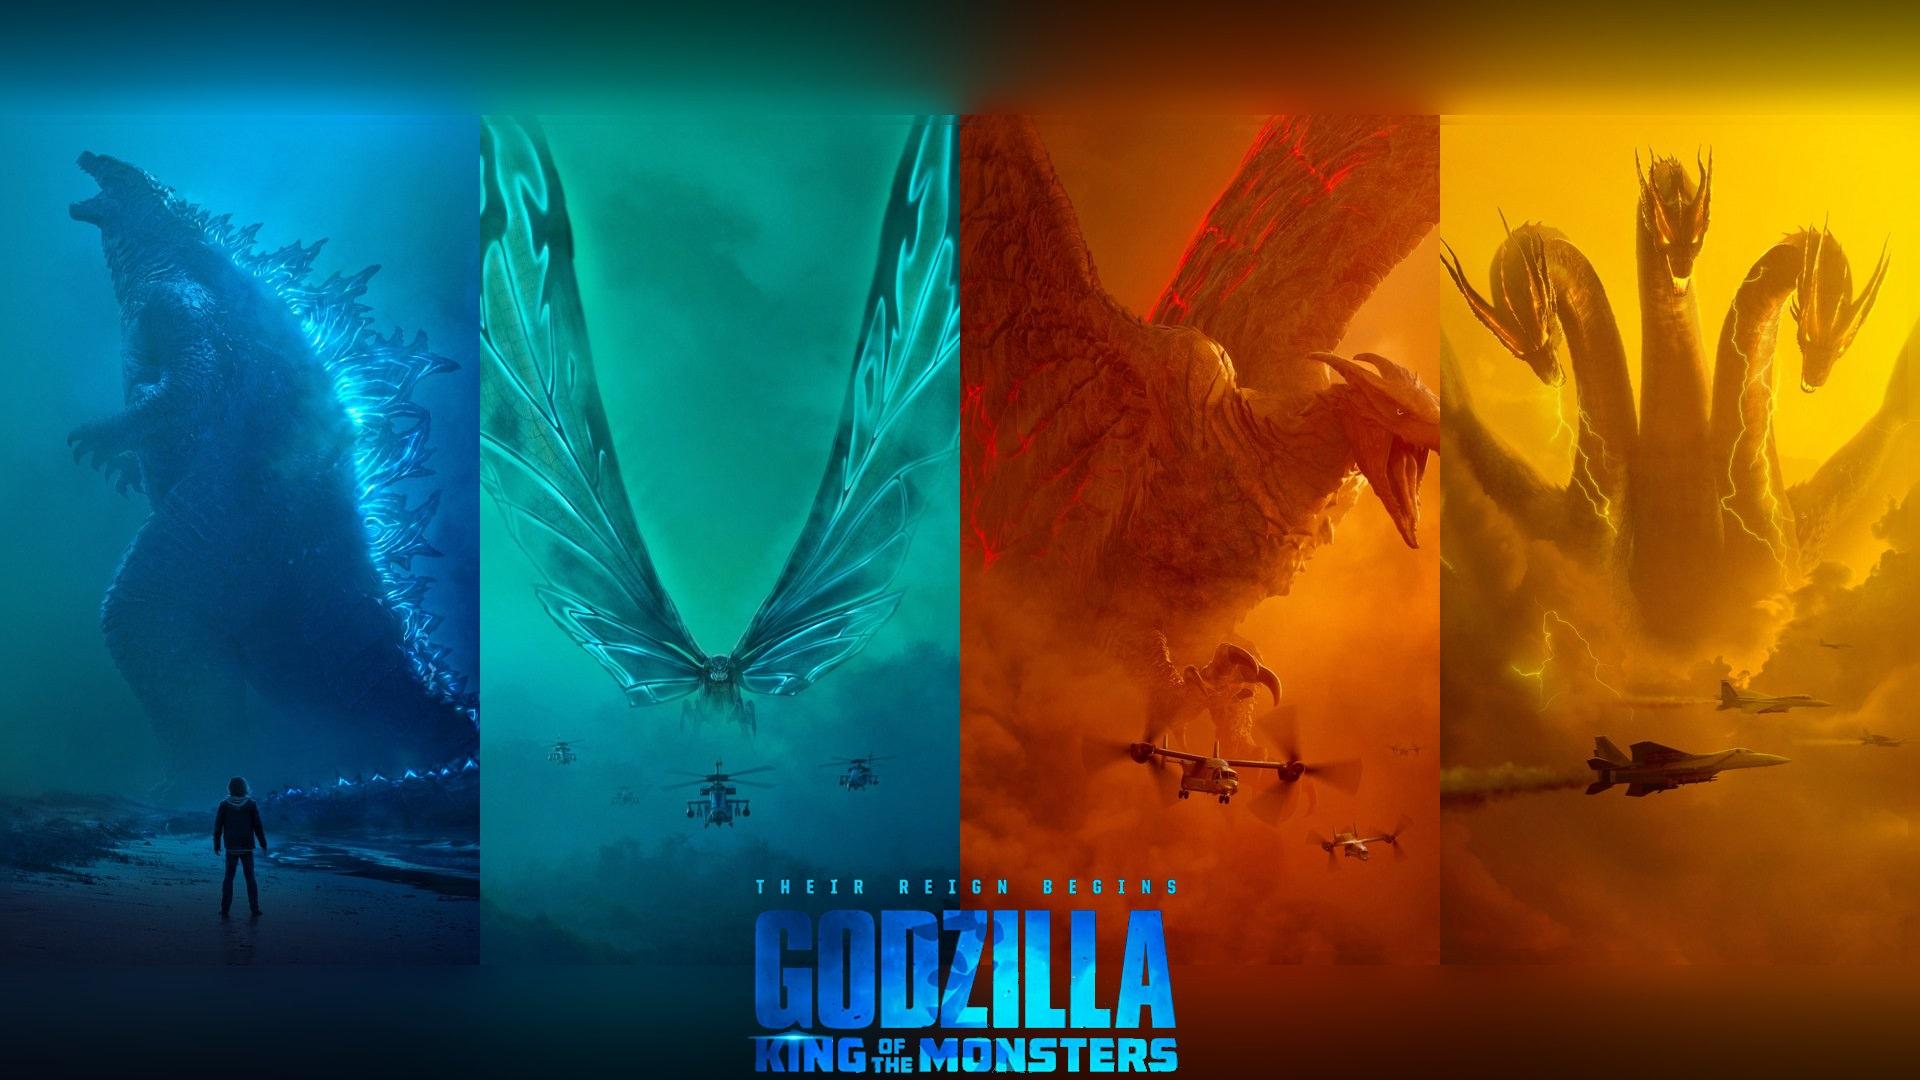 Wallpaper I made from the character posters for Godzilla: King of the Monsters